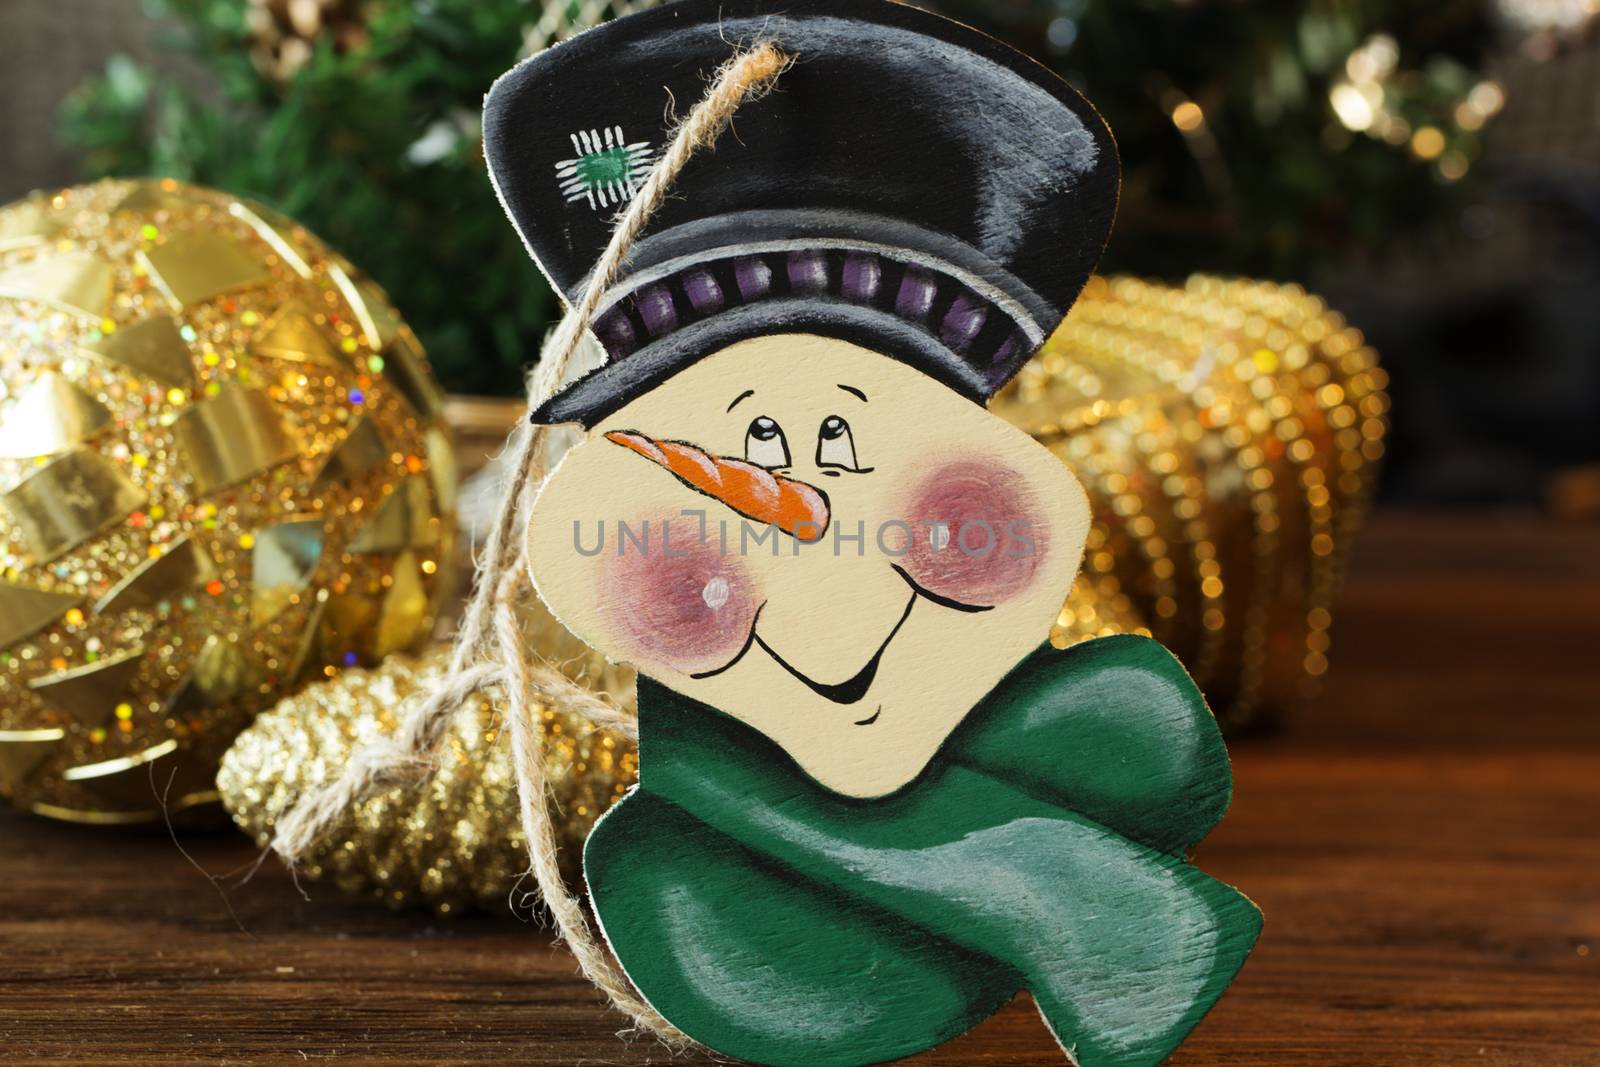 wooden snowman. Christmas toy of snowman. Cute snowmen on Christmas background